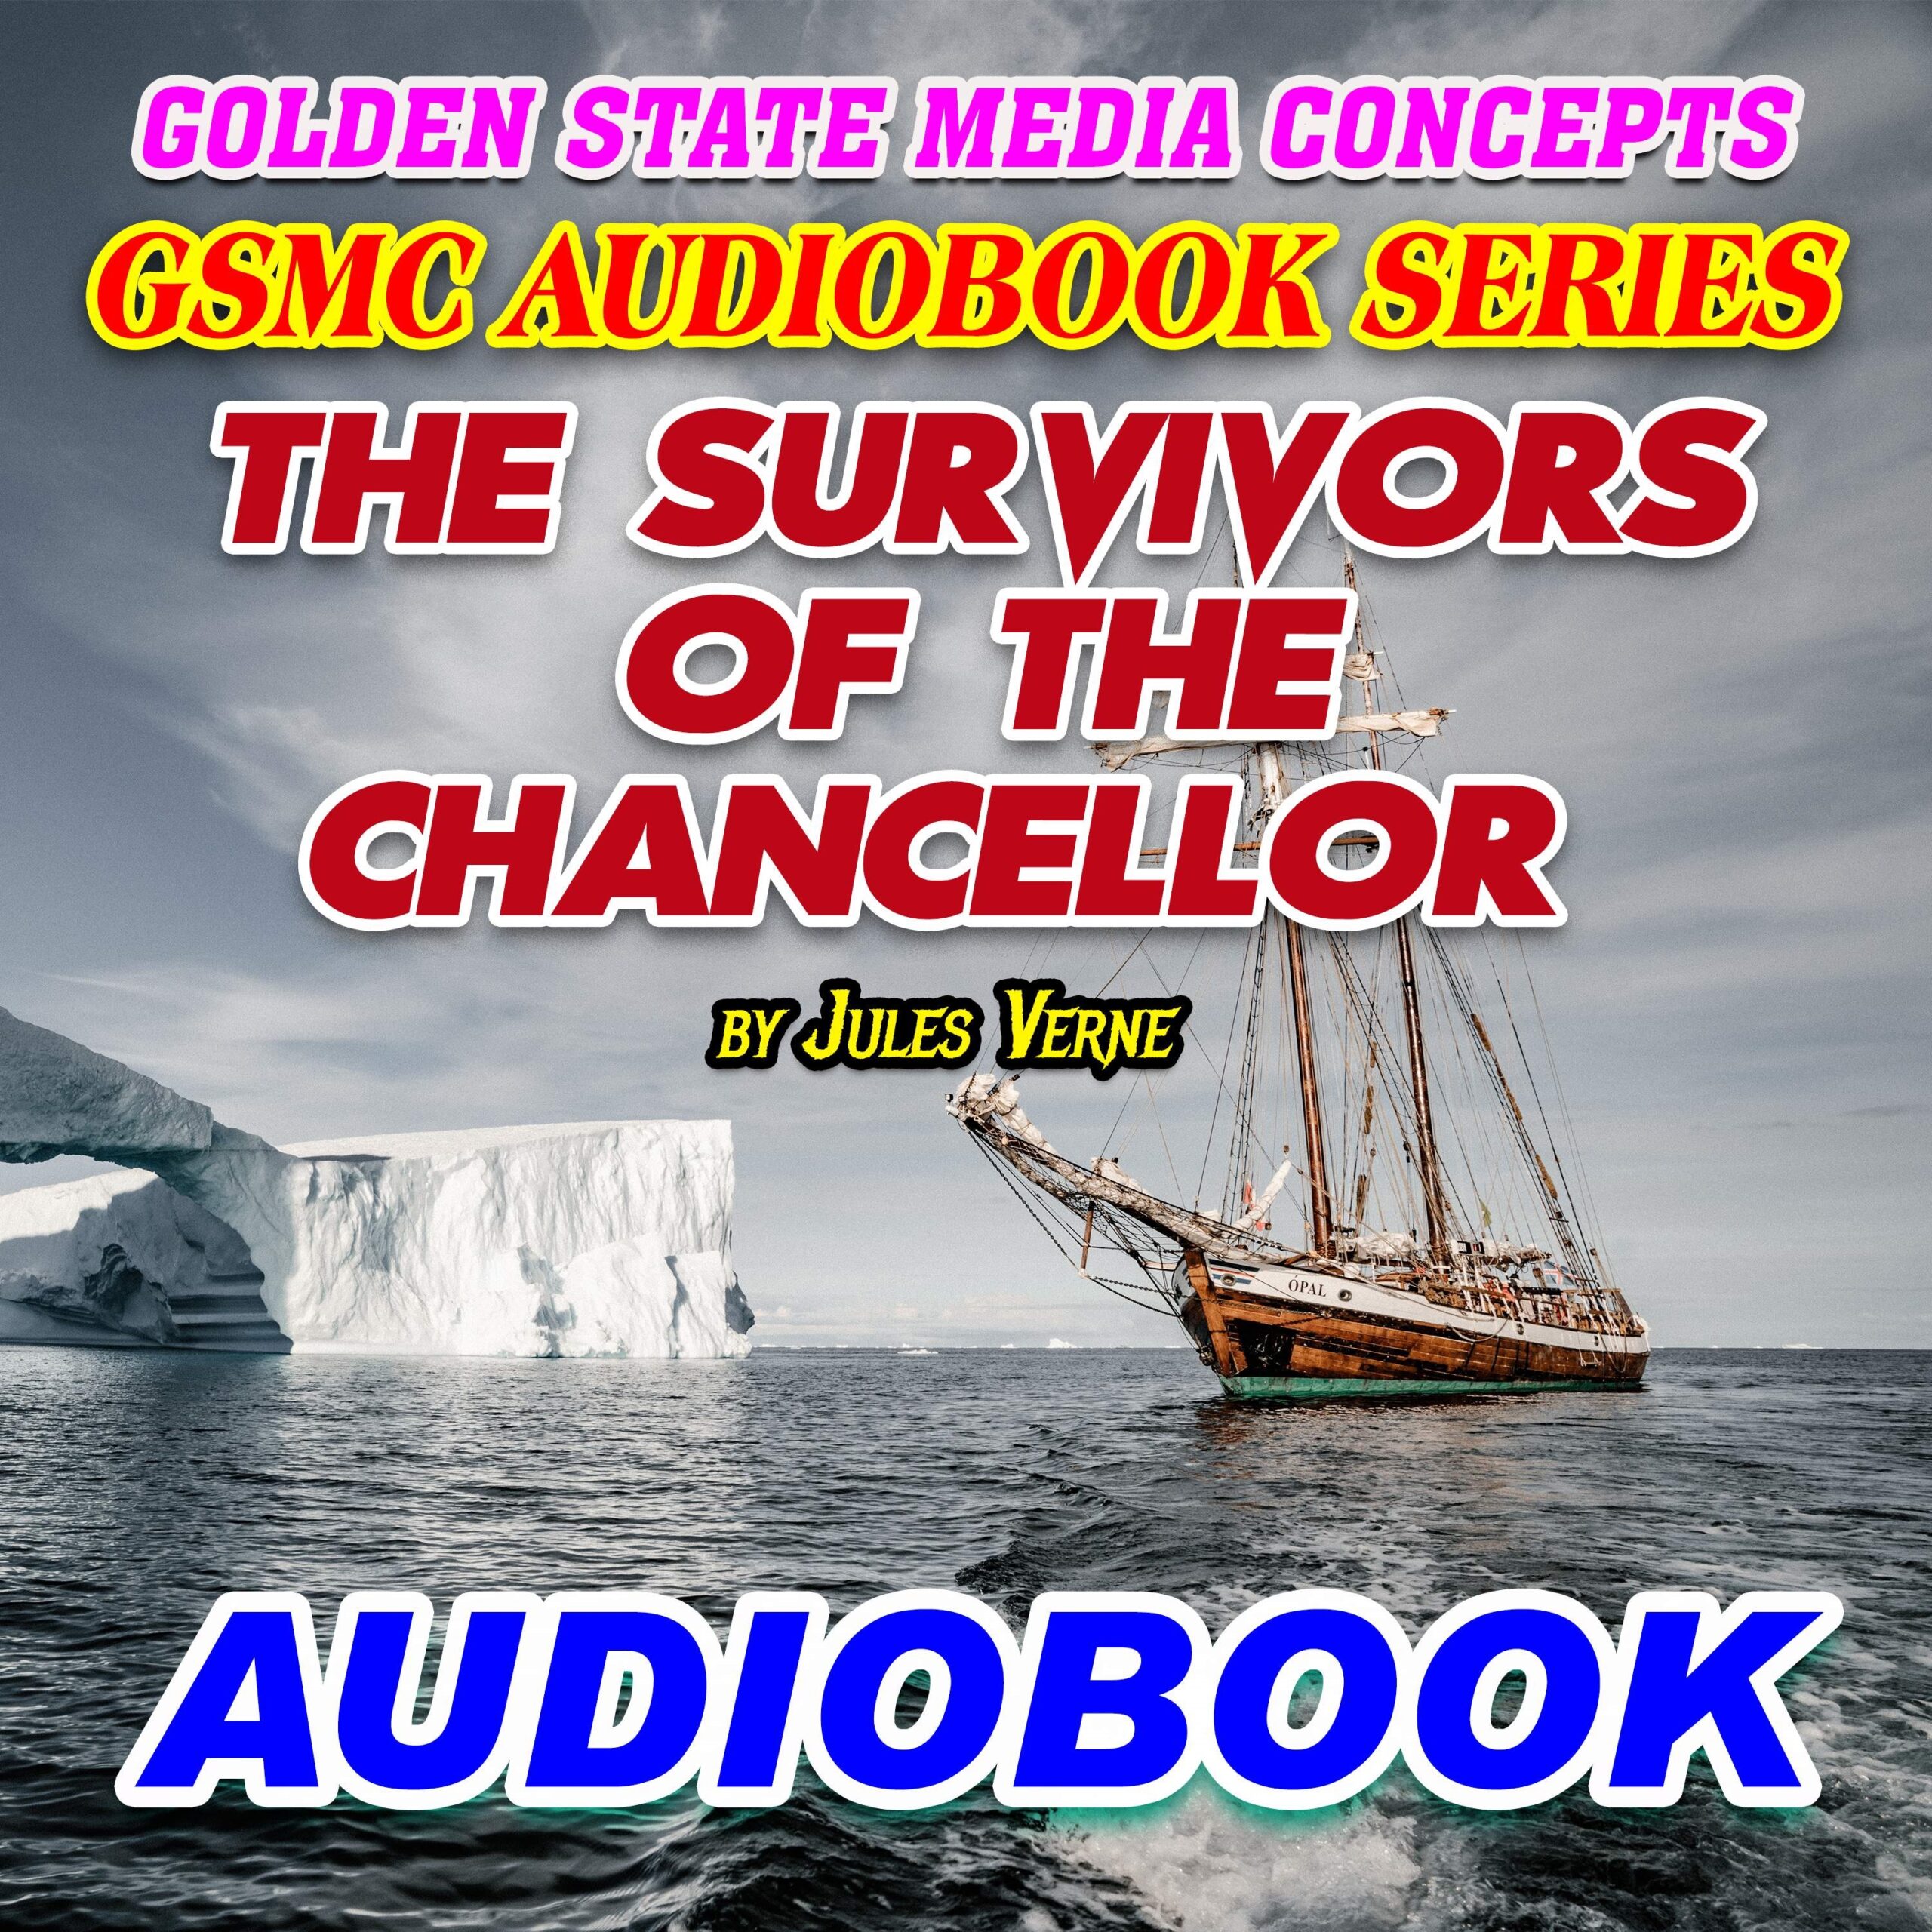 GSMC Audiobook Series: The Survivors of the Chancellor by Jules Verne